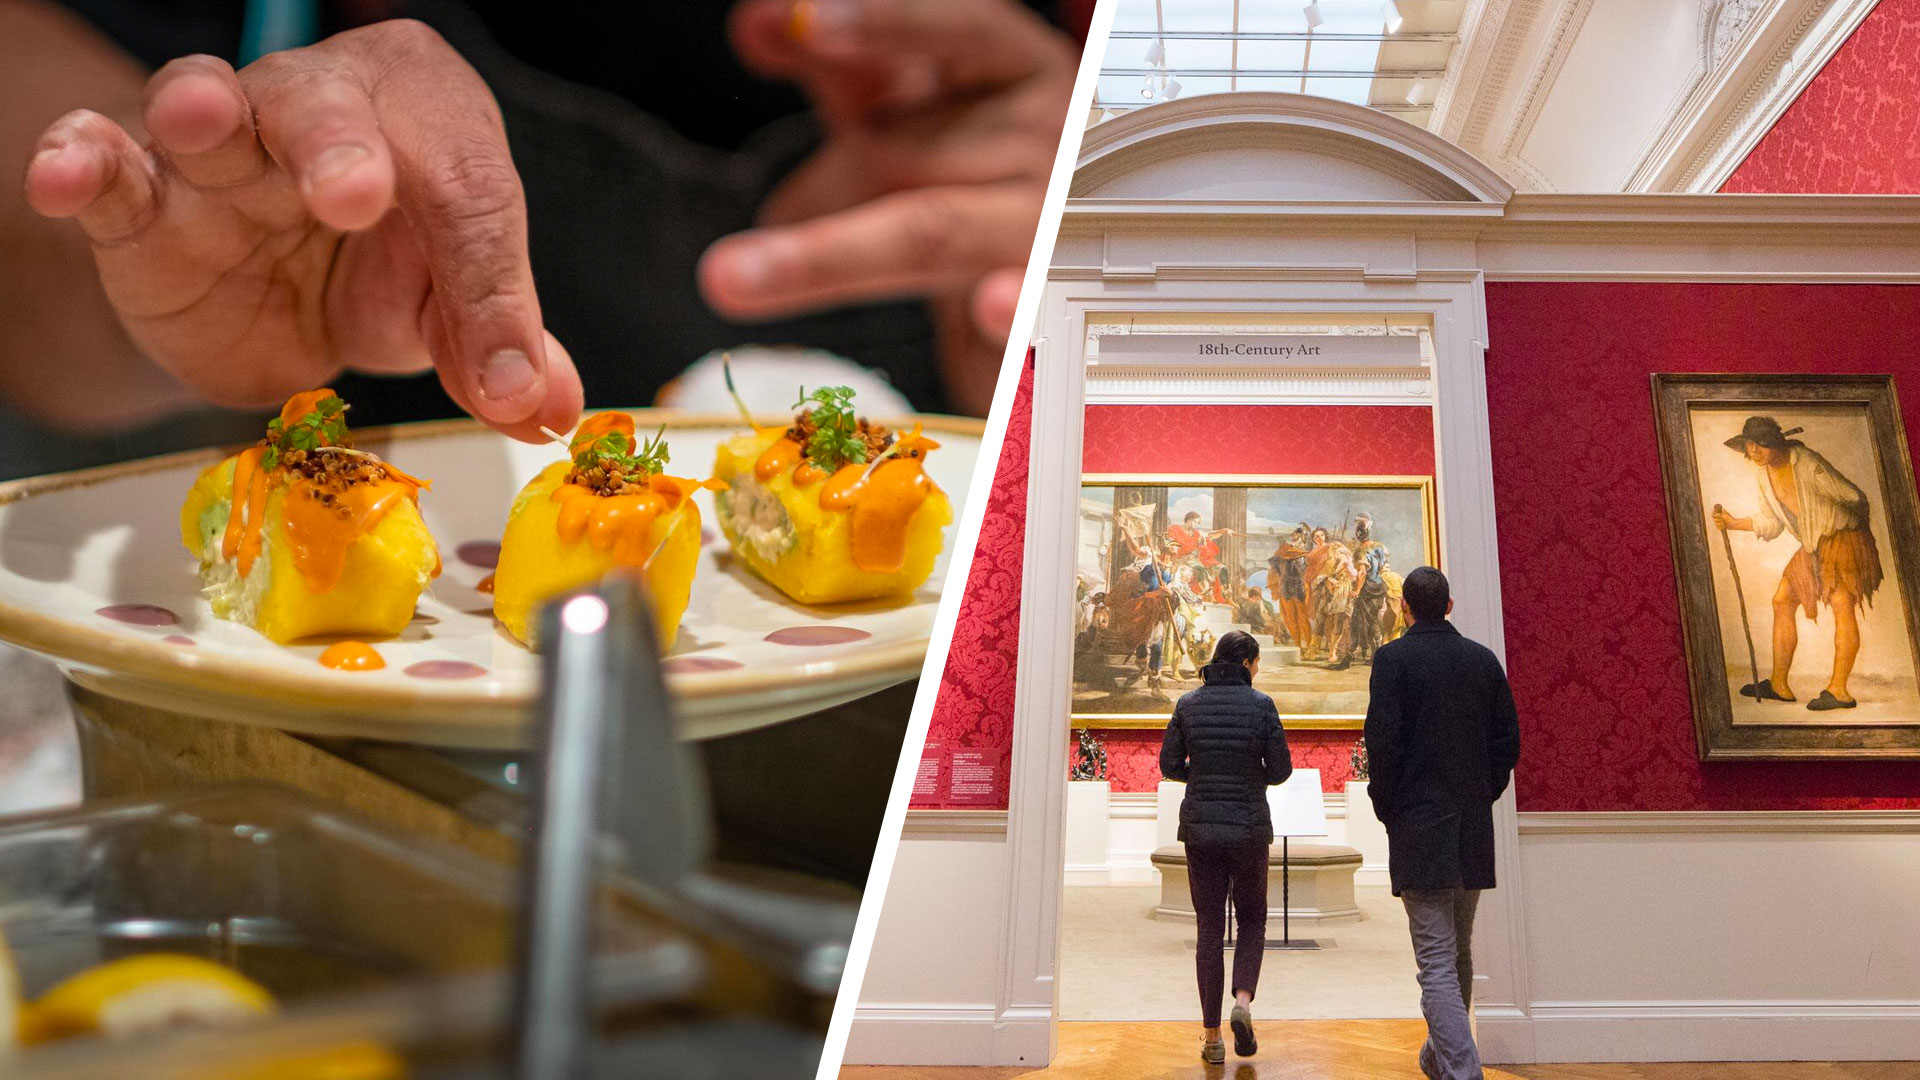 Baltimore Winter Restaurant Week Eat Like a Tourist Pairing - Topside and Walters Art Museum